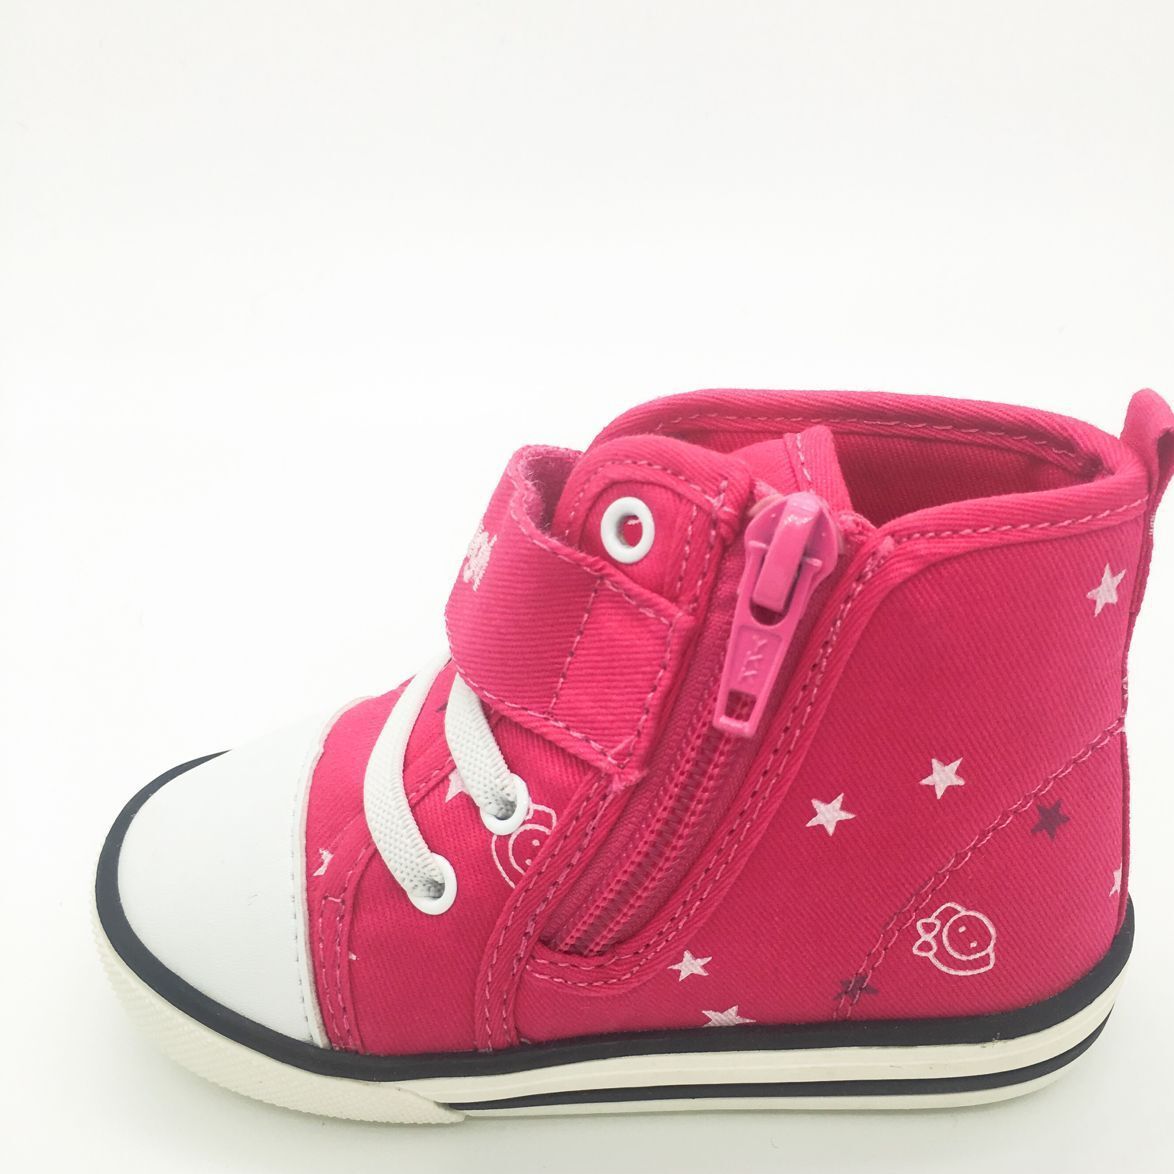 Autumn style Korean fashion casual shoes girl high top pink canvas shoes